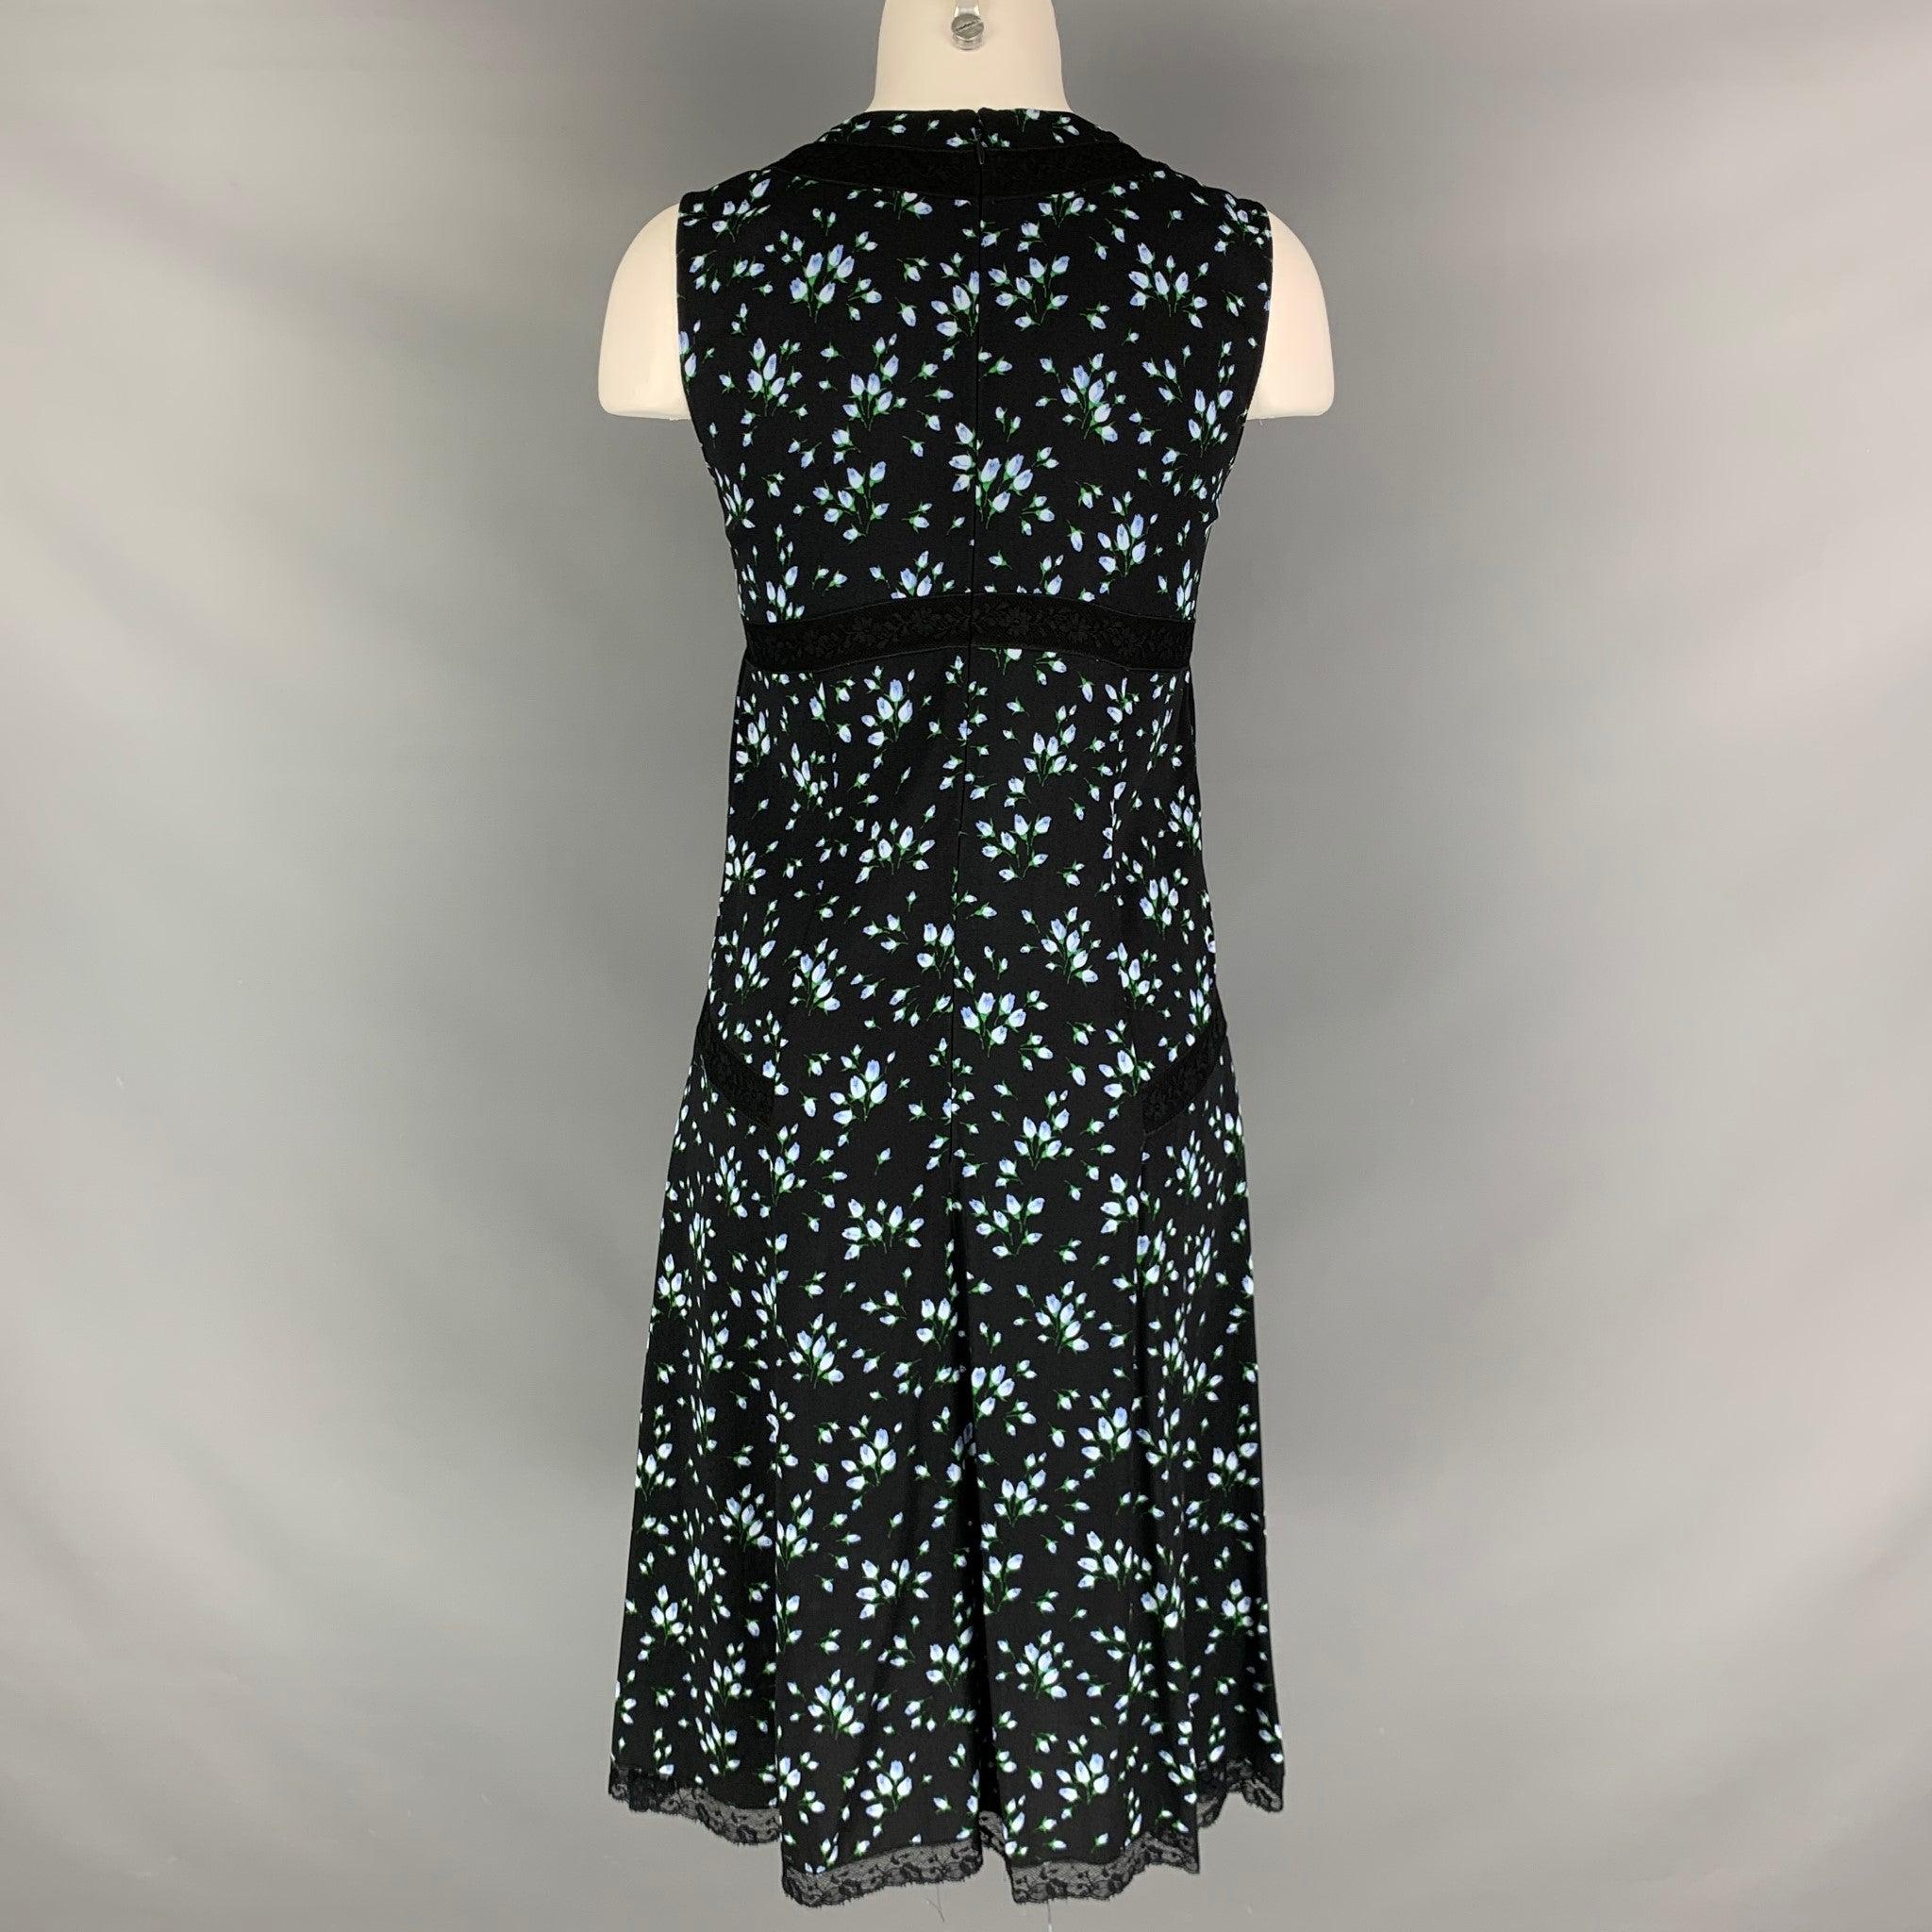 PRADA Size 8 Black Blue & Green Viscose Elastane Floral Sleeveless Dress In Excellent Condition For Sale In San Francisco, CA